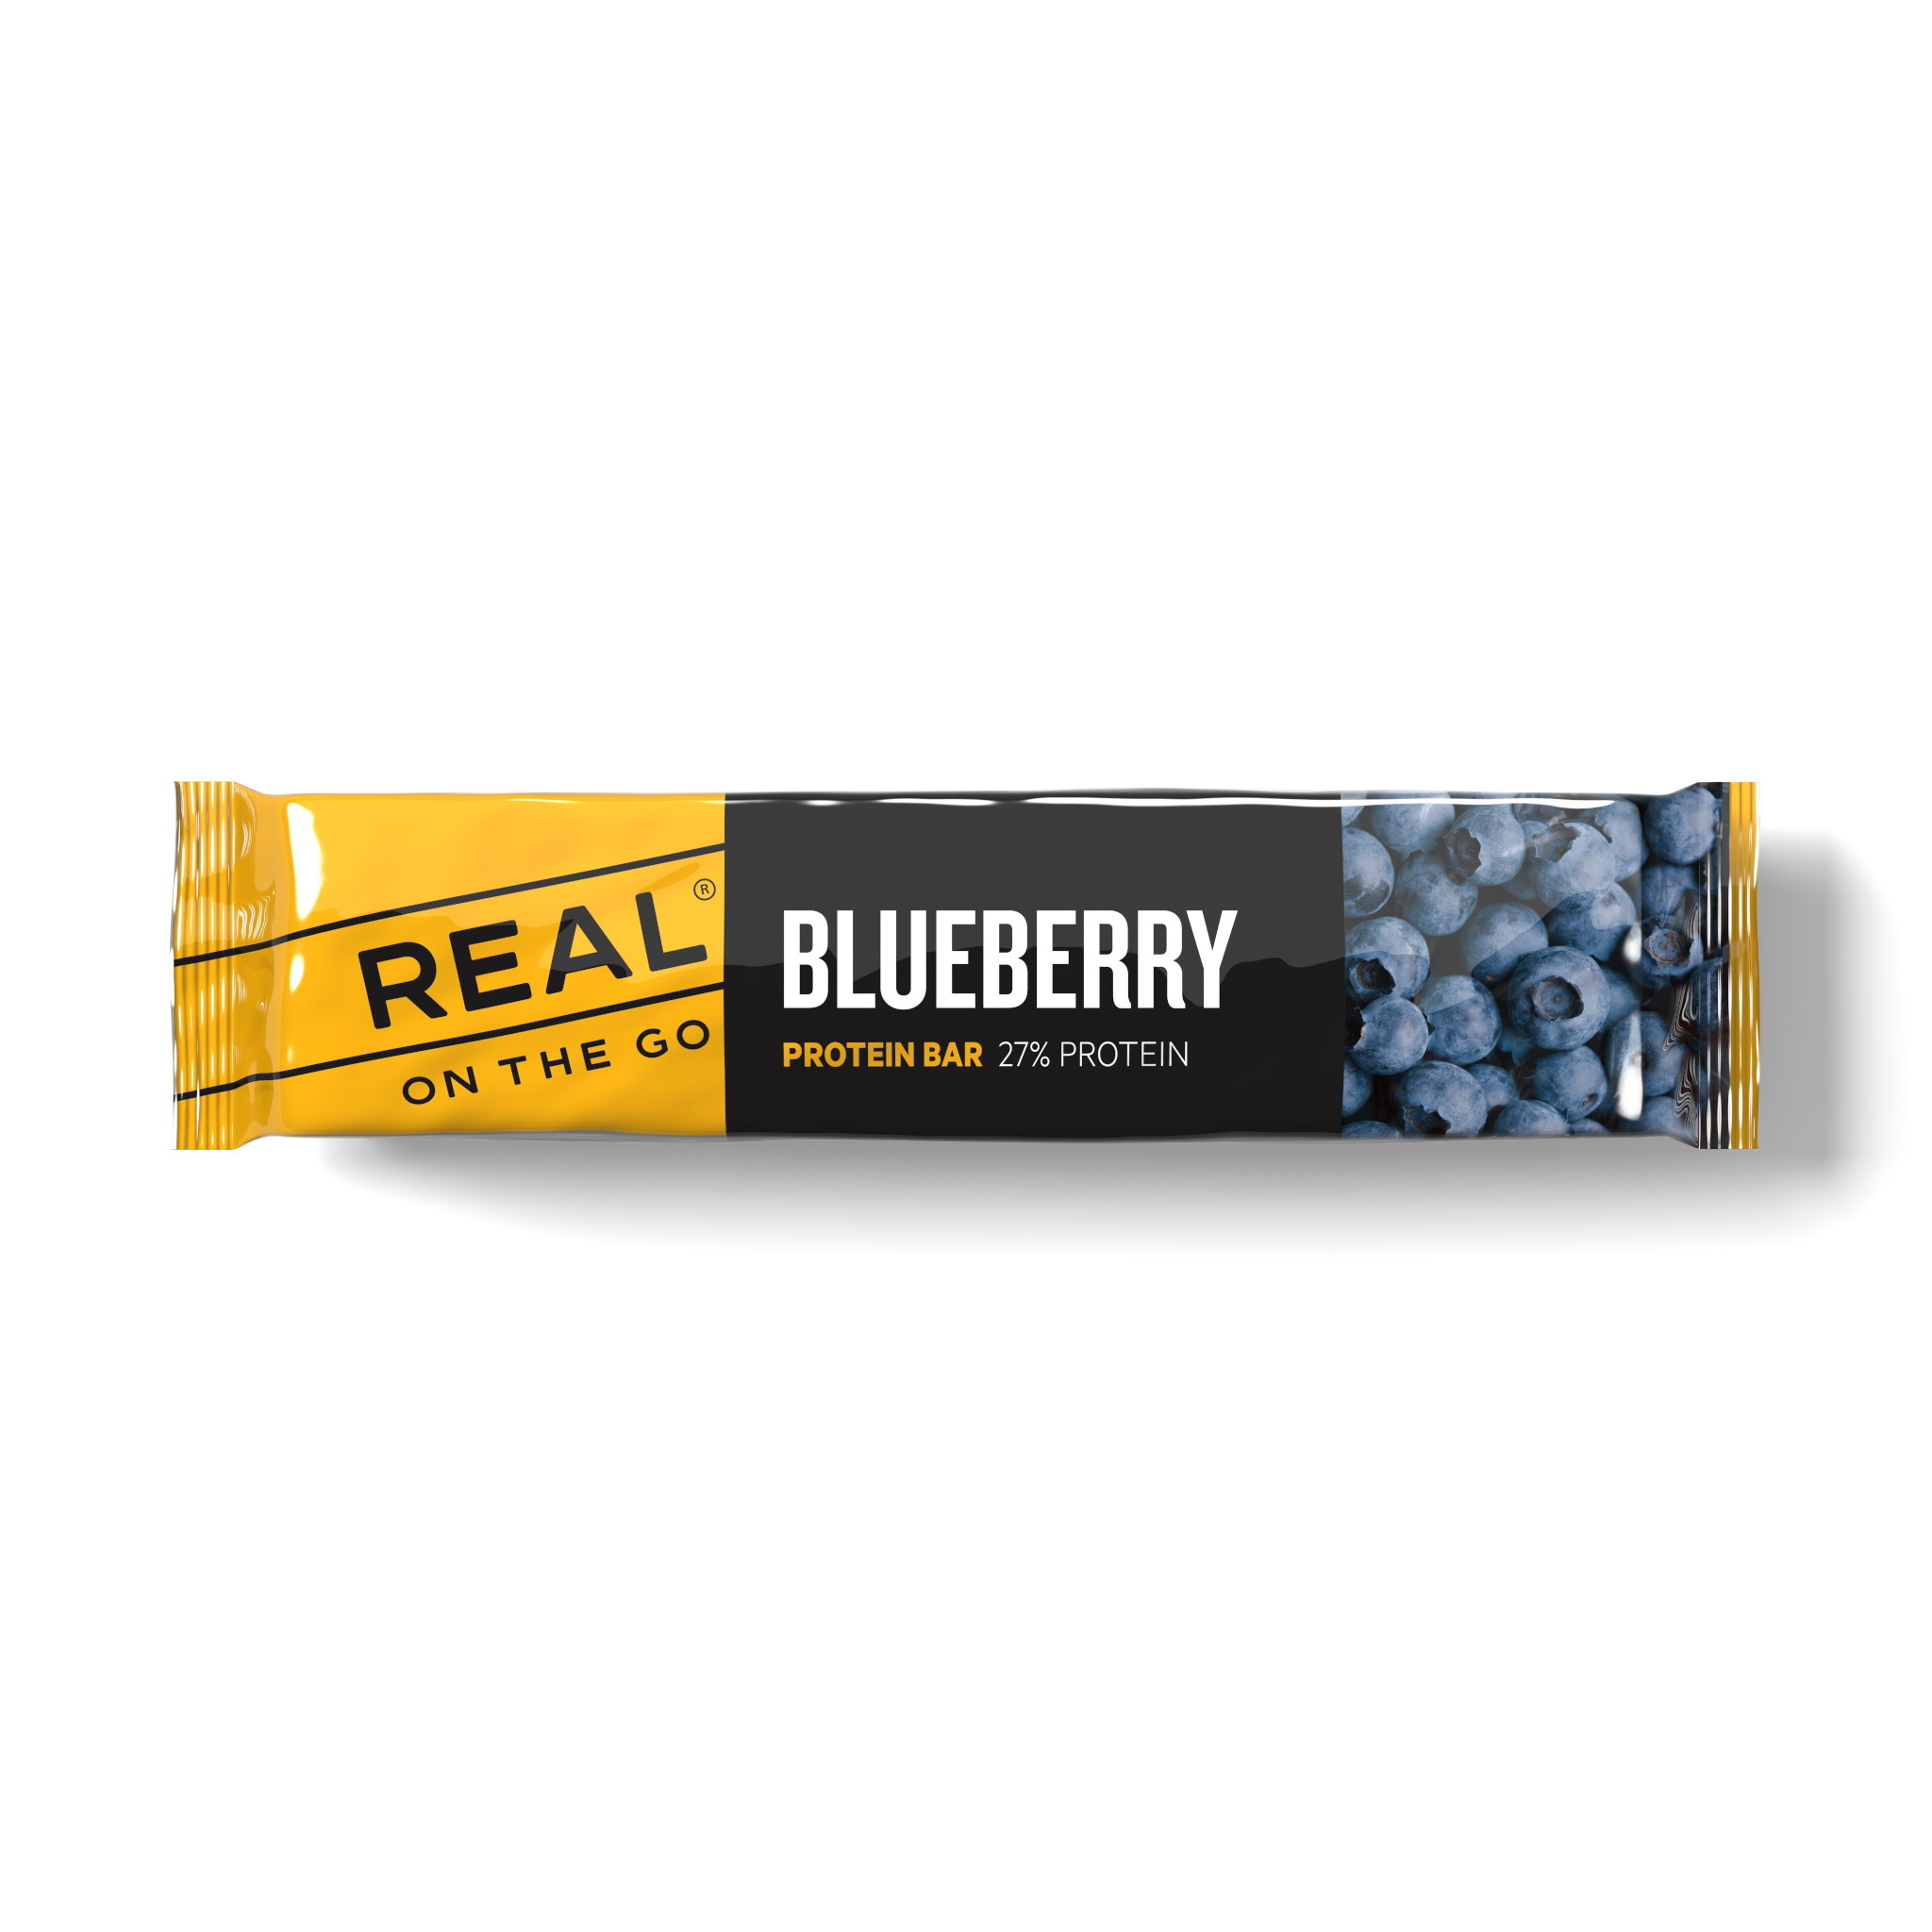 Real Turmat Otg Protein Bar Blueberry & Bl Yellow